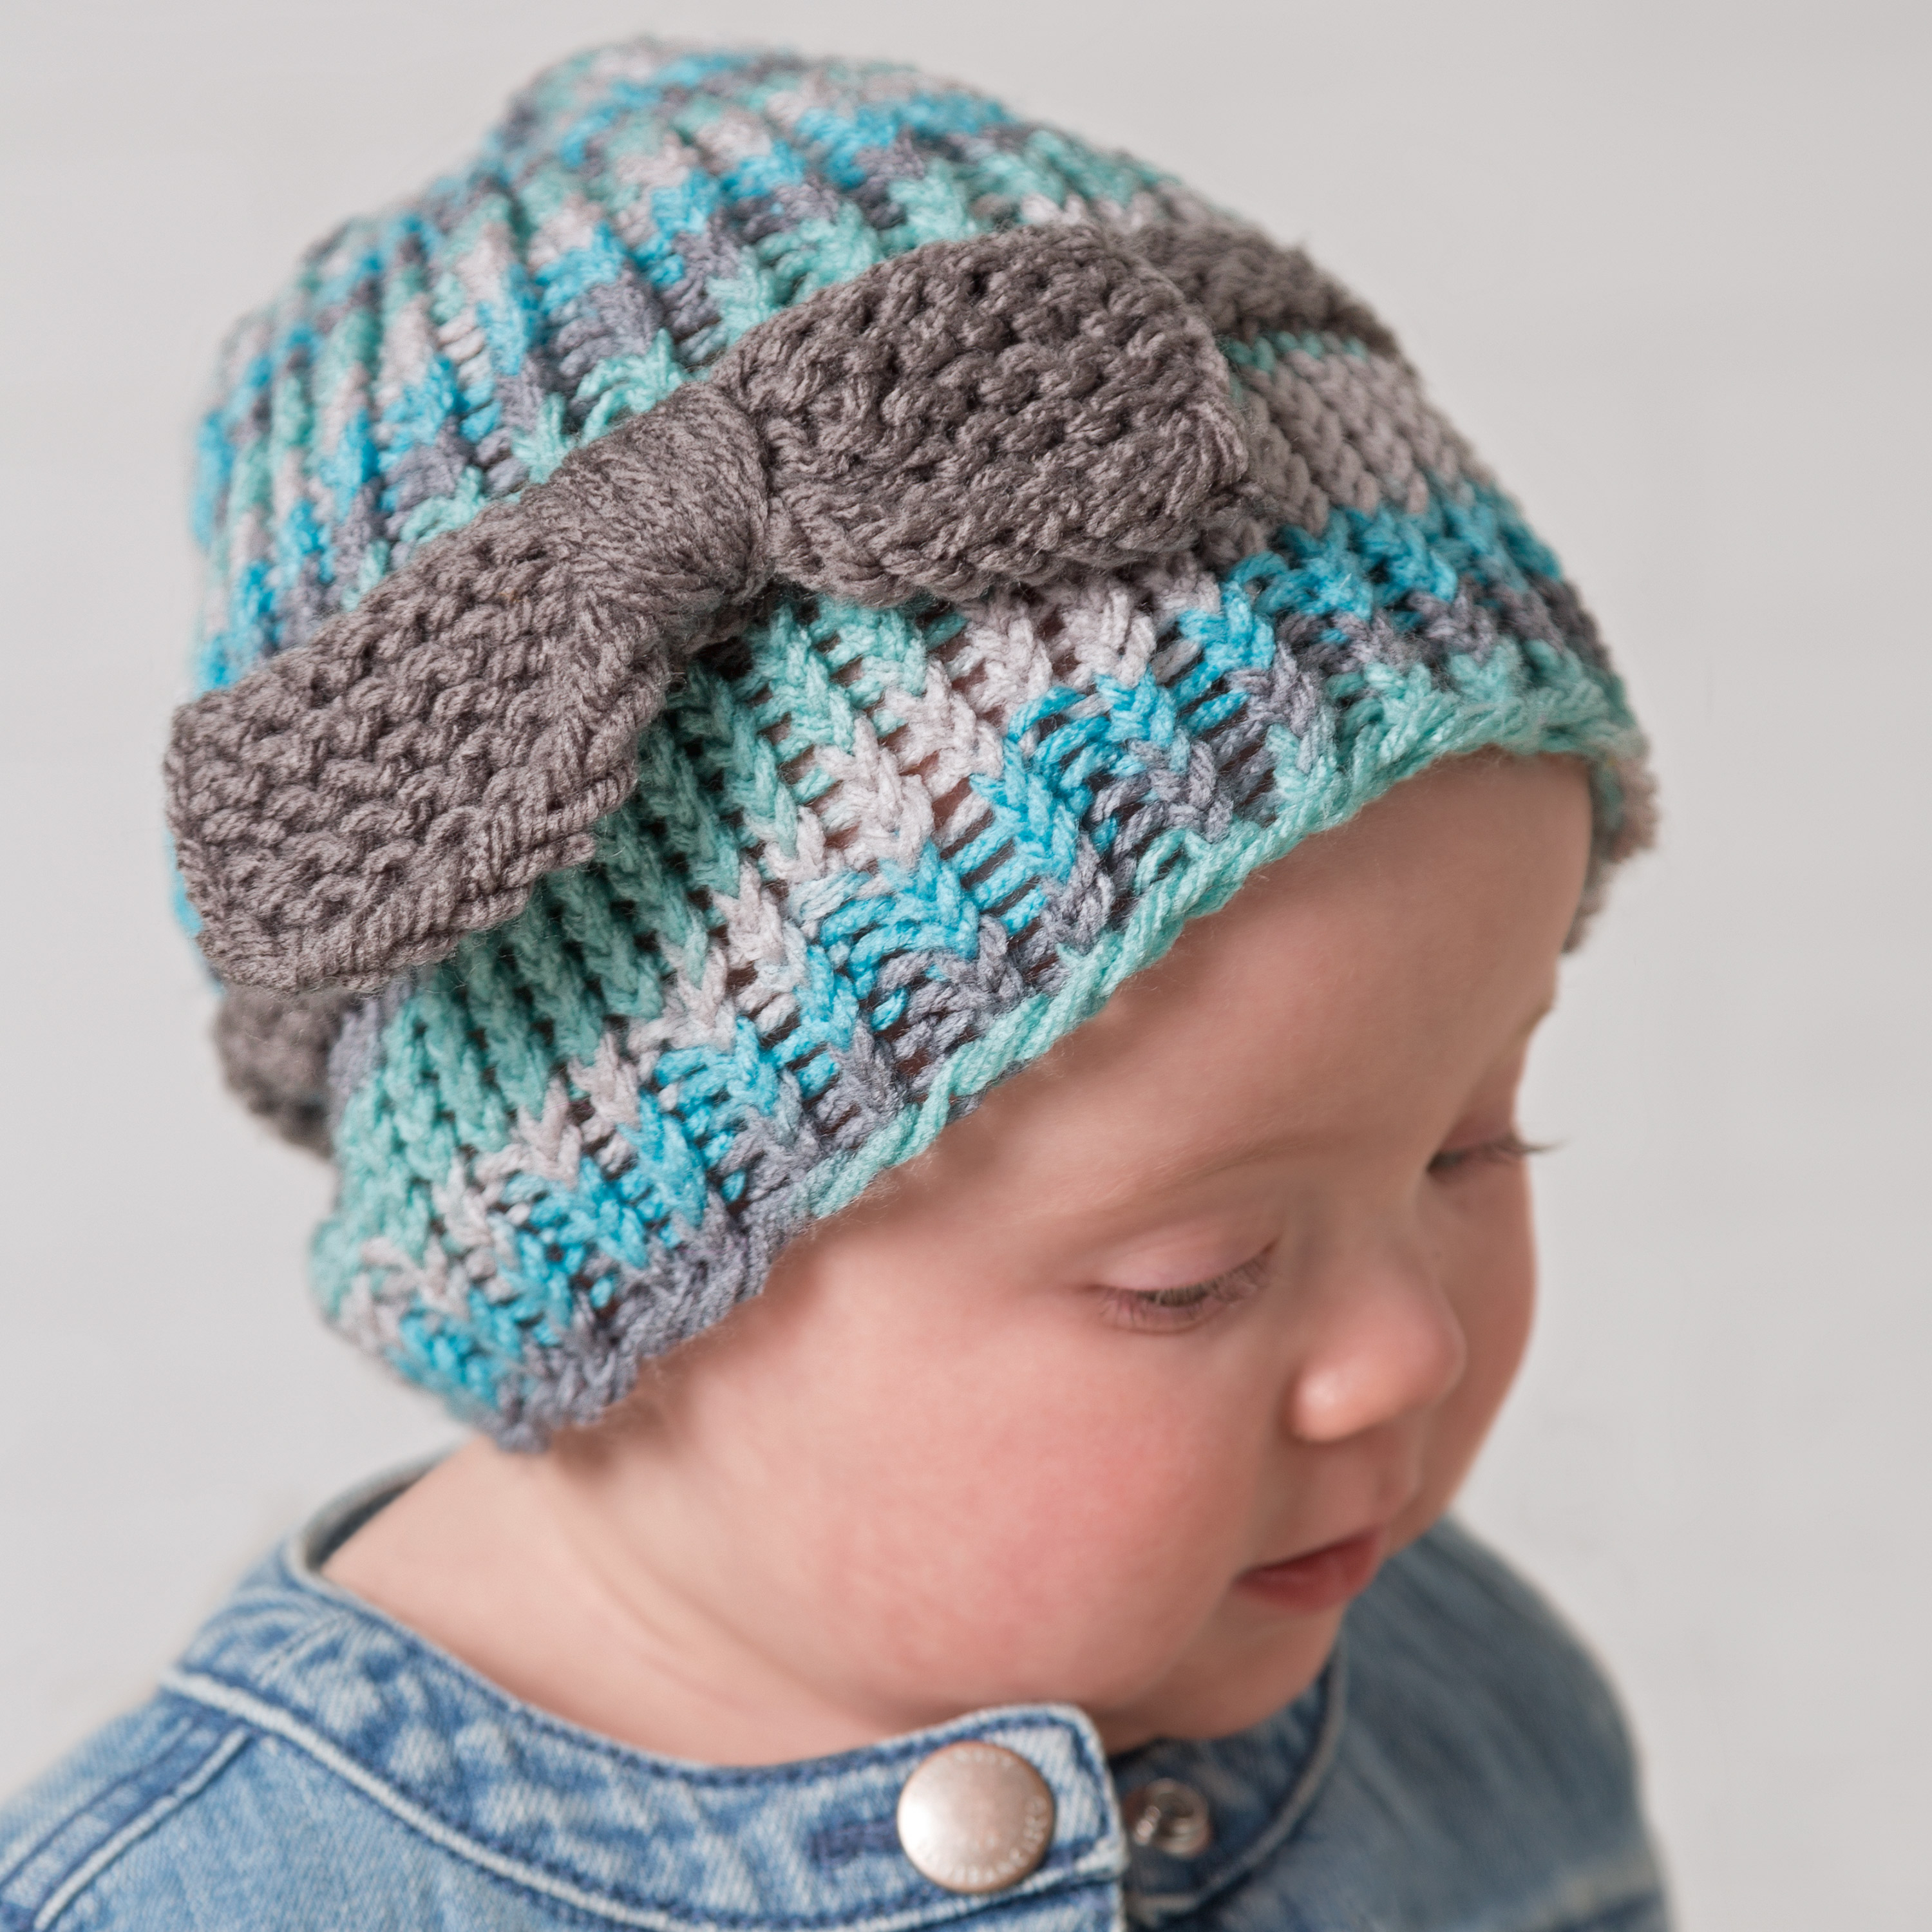 Loom Knit Hat Patterns Free Loom Knit Ba Or Toddler Bow Hat